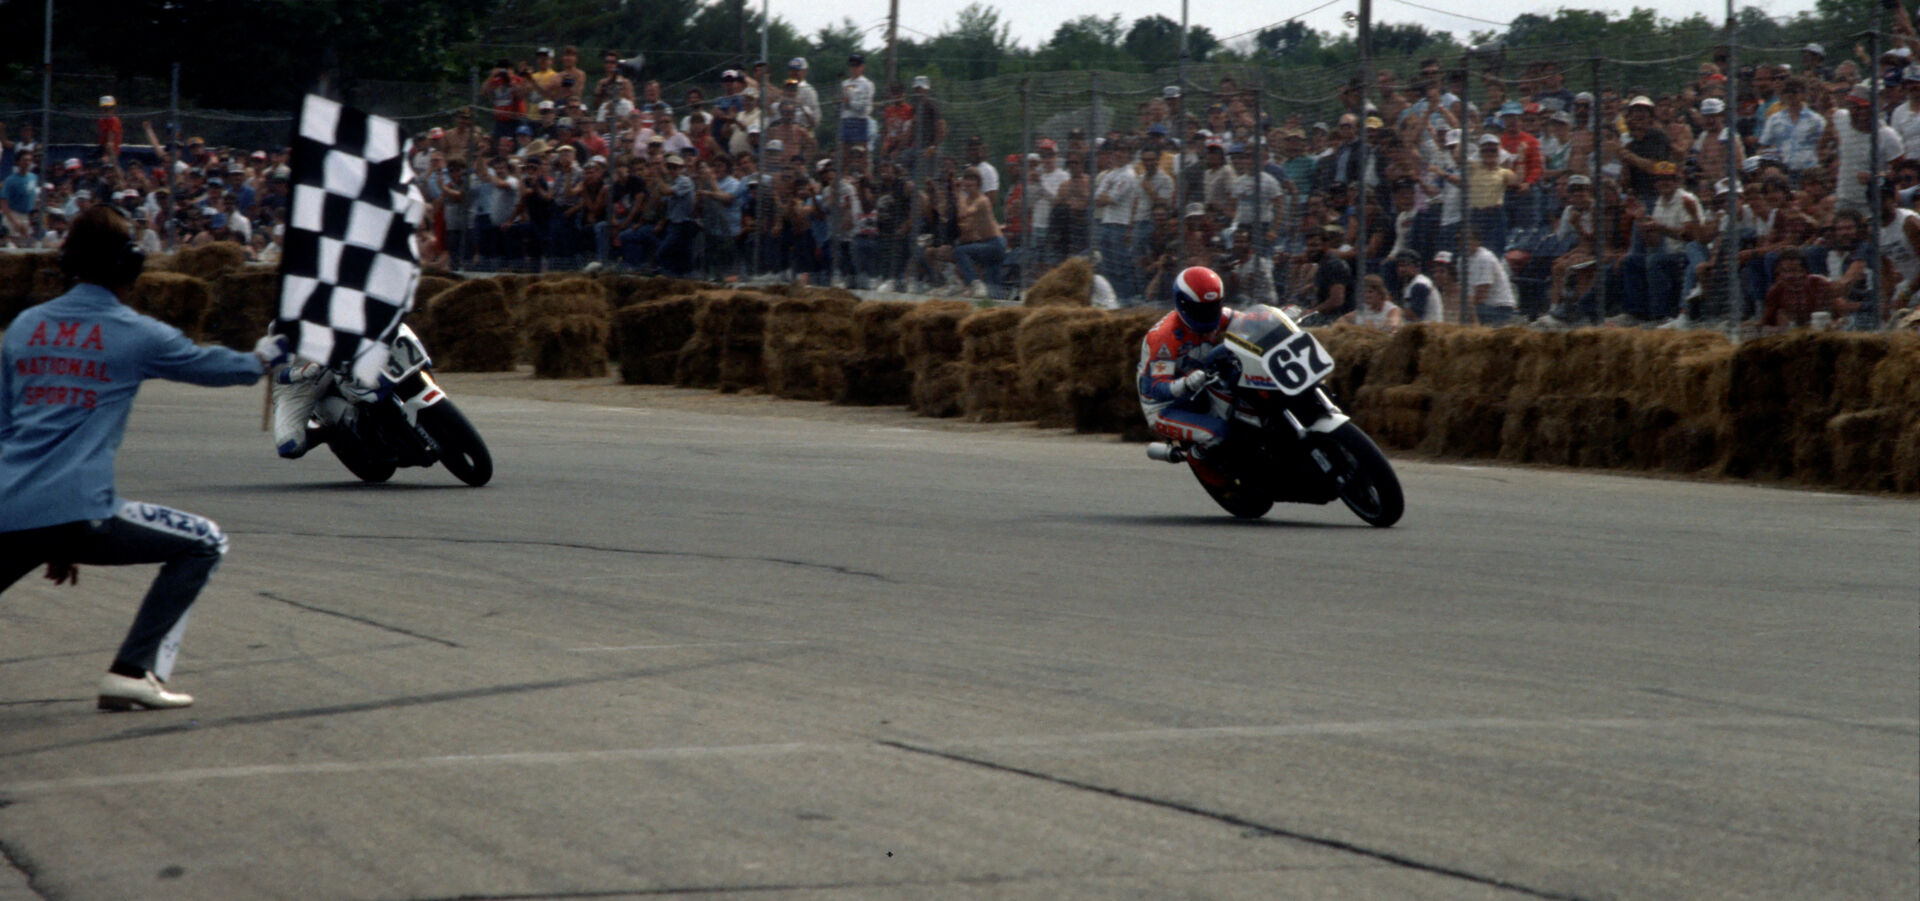 Bubba Shobert (67) takes the checkered flag ahead of Dale Quarterley (32) at the 1986 Loudon AMA Superbike race. Call them crude, but the hay bales were a significant step forward in rider safety at the time. Photo by Larry Lawrence.